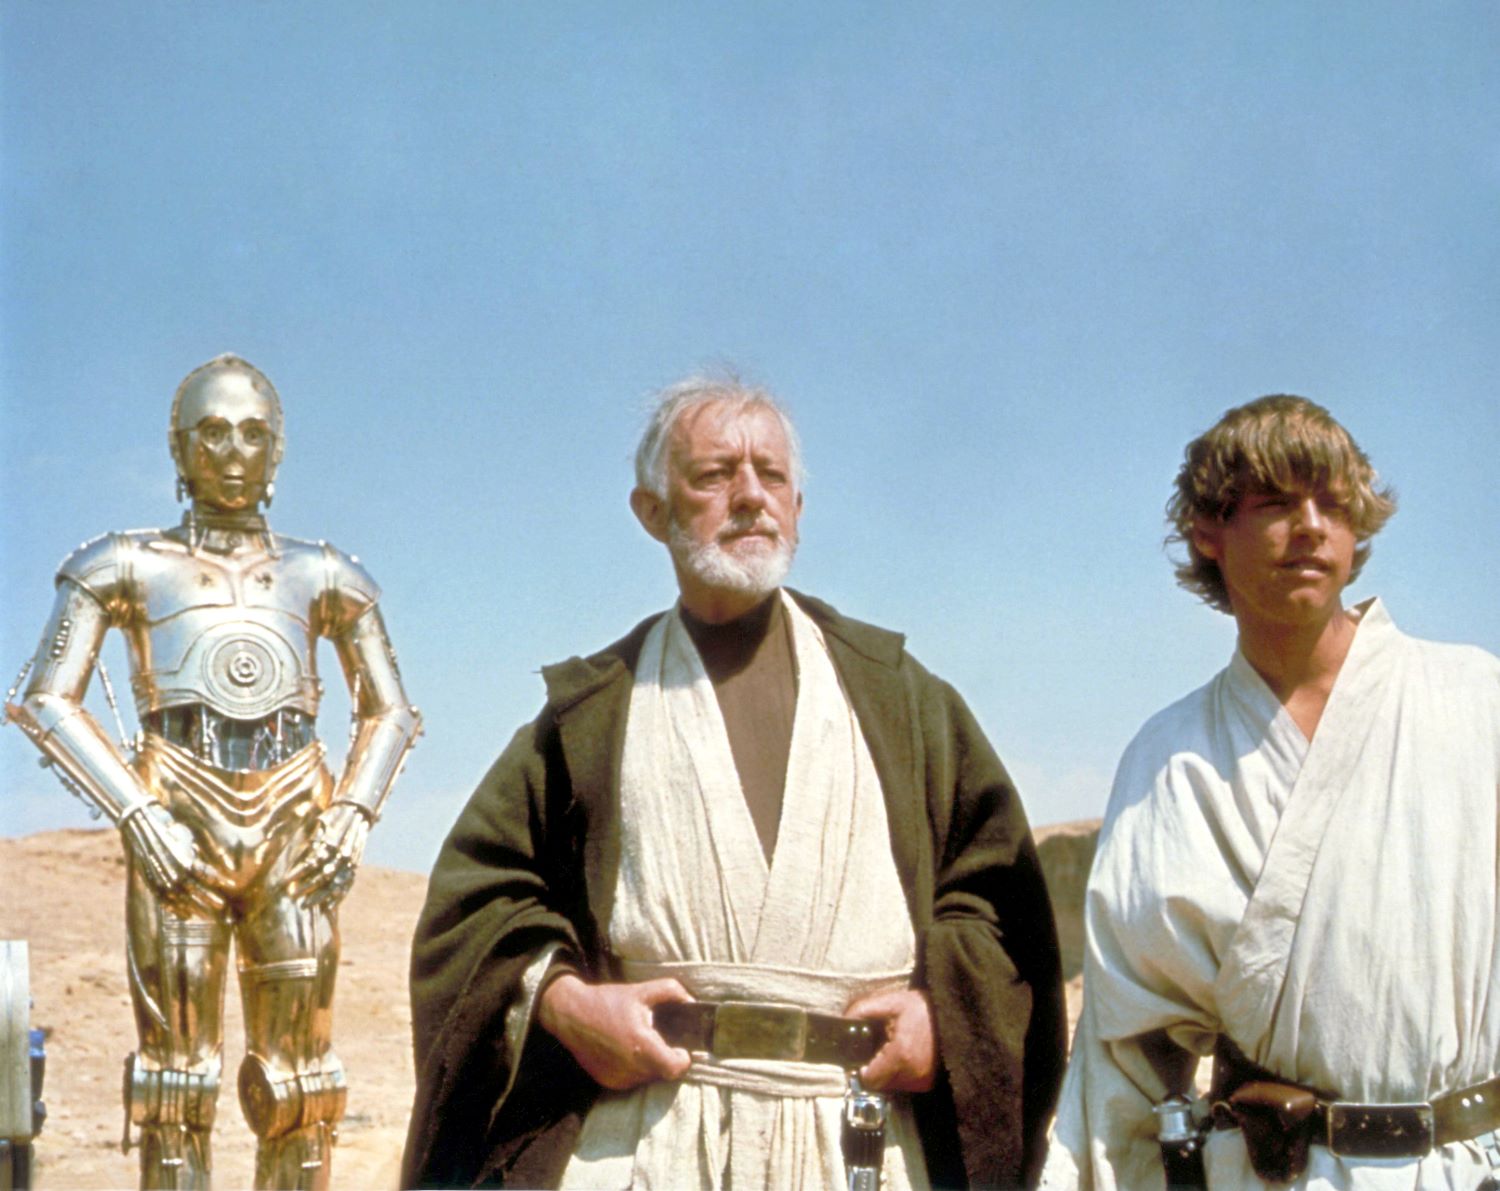 Anthony Daniels, Alec Guinness and Mark Hamill on the set of Star Wars Episode IV A New Hope